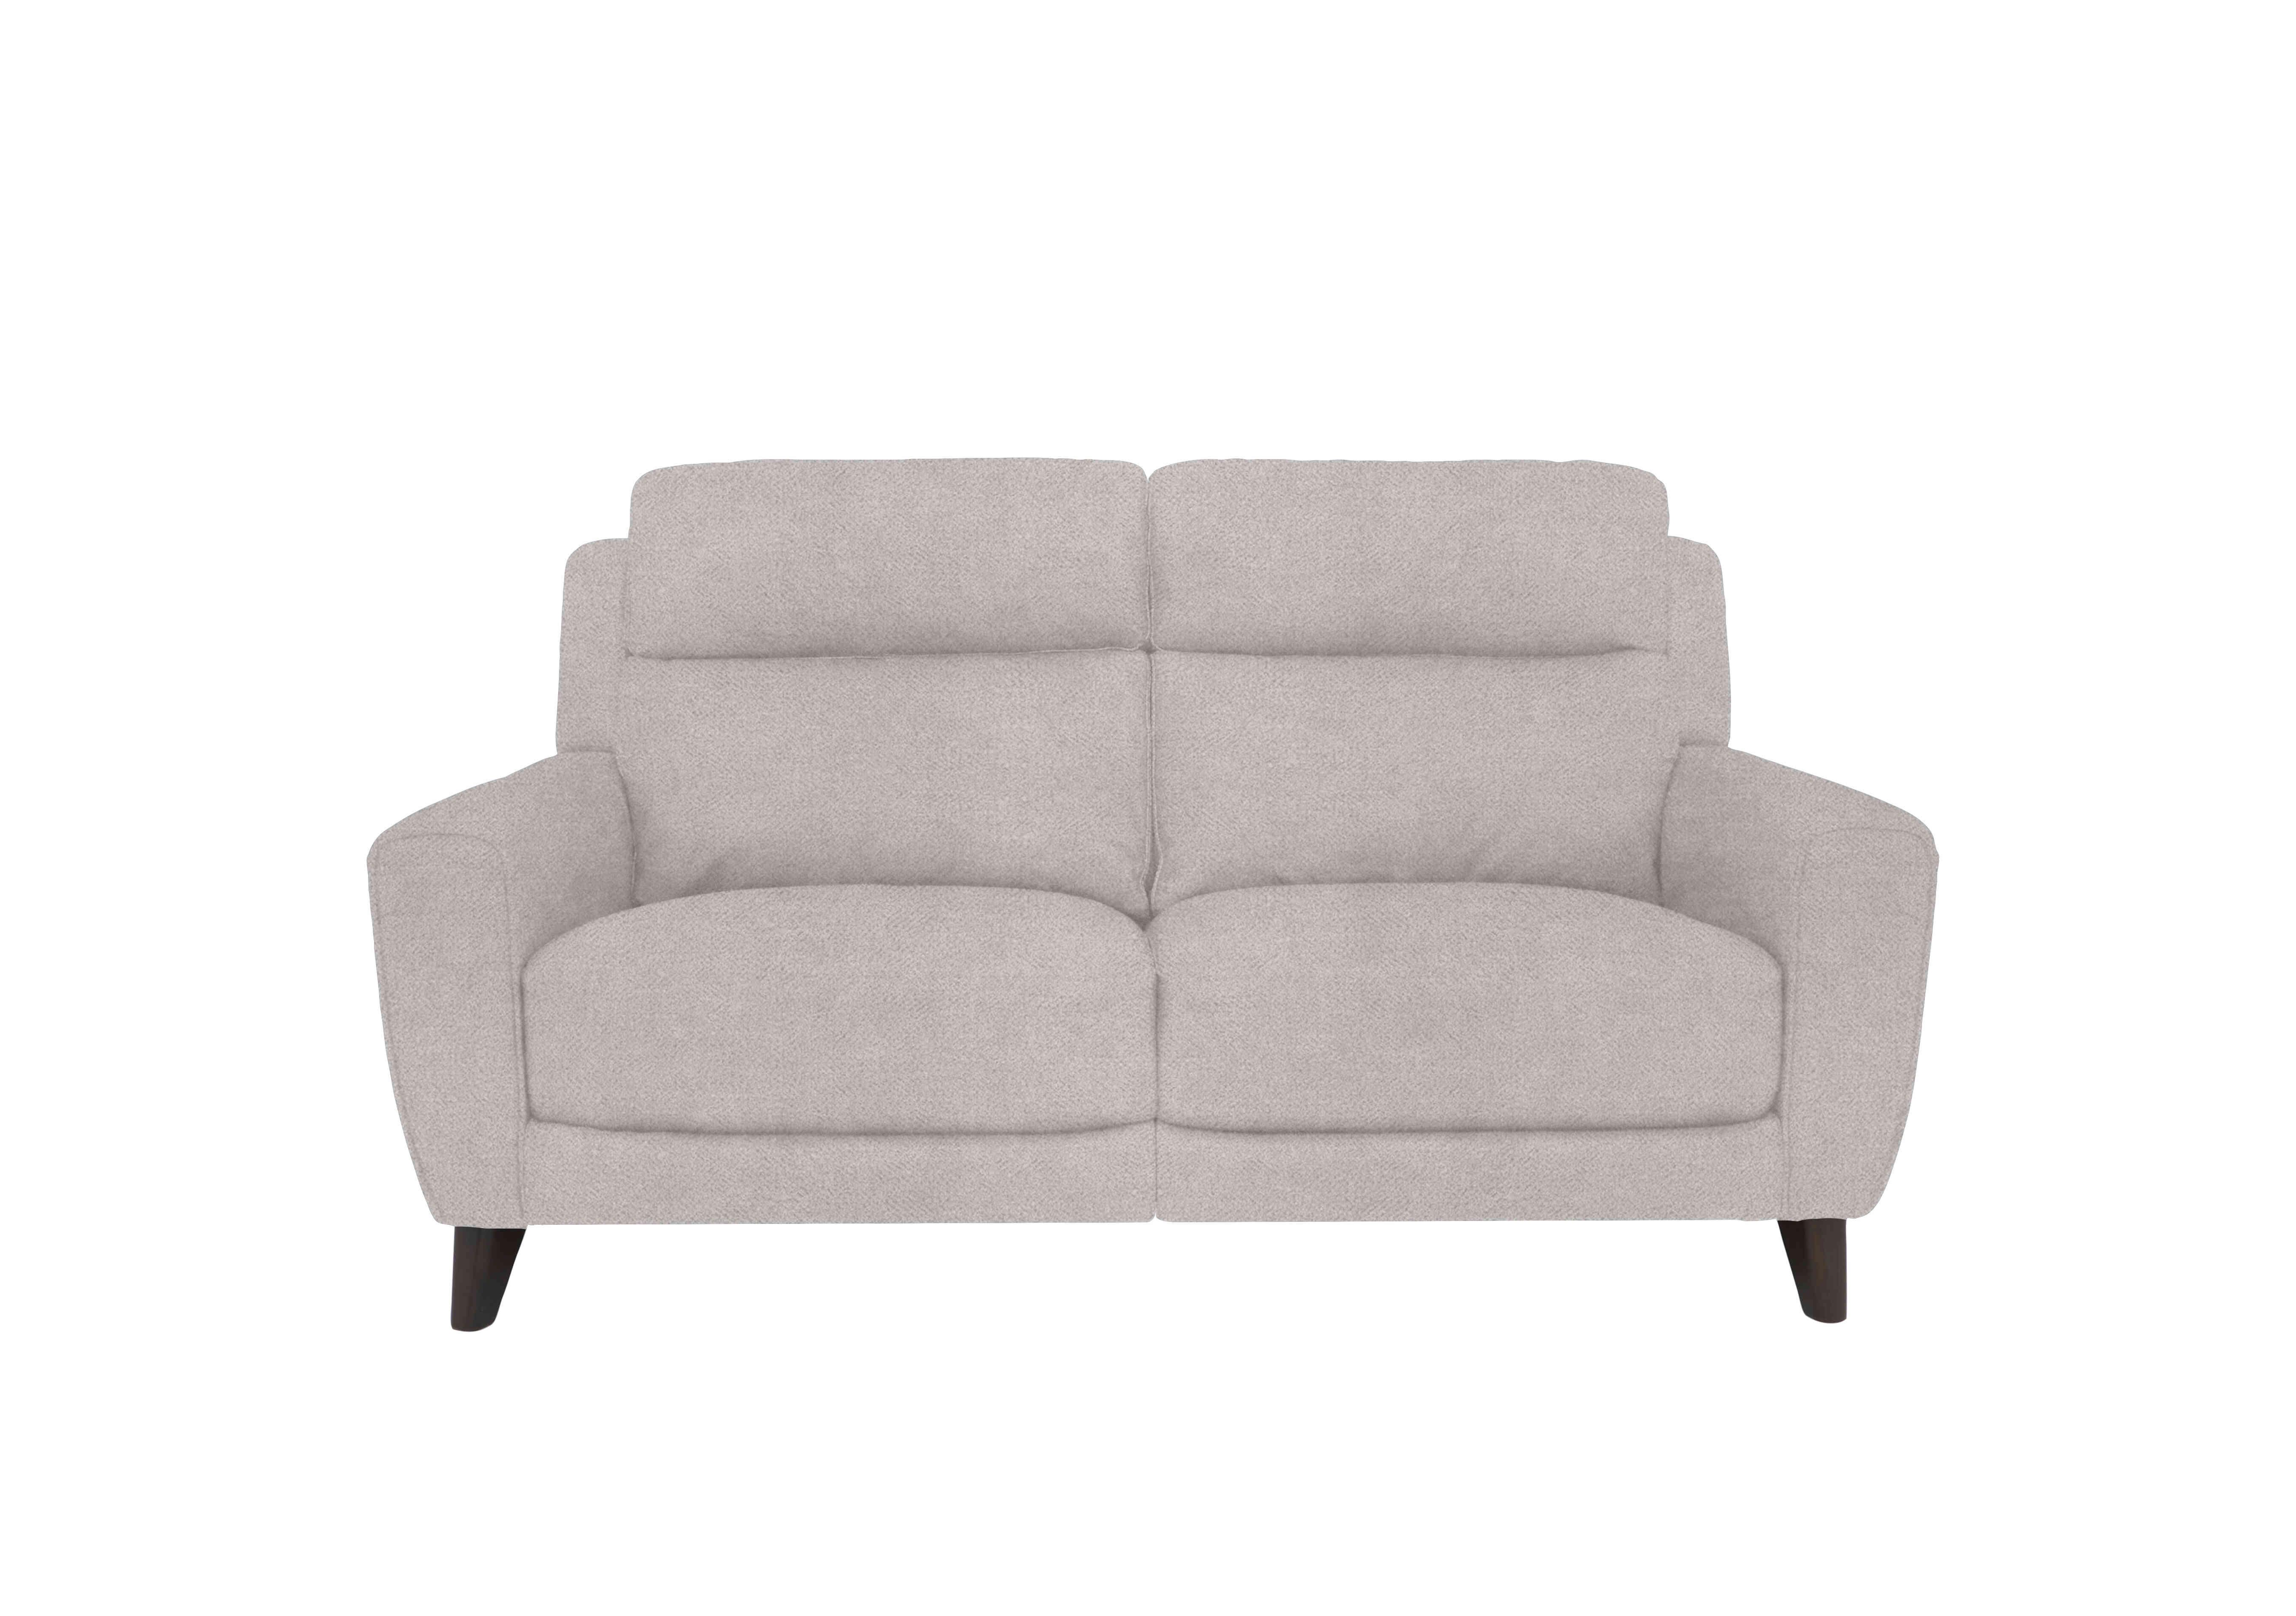 Zen 2 Seater Fabric Power Recliner Sofa with Power Headrests in Fab-Meo-R23 Silver Grey on Furniture Village